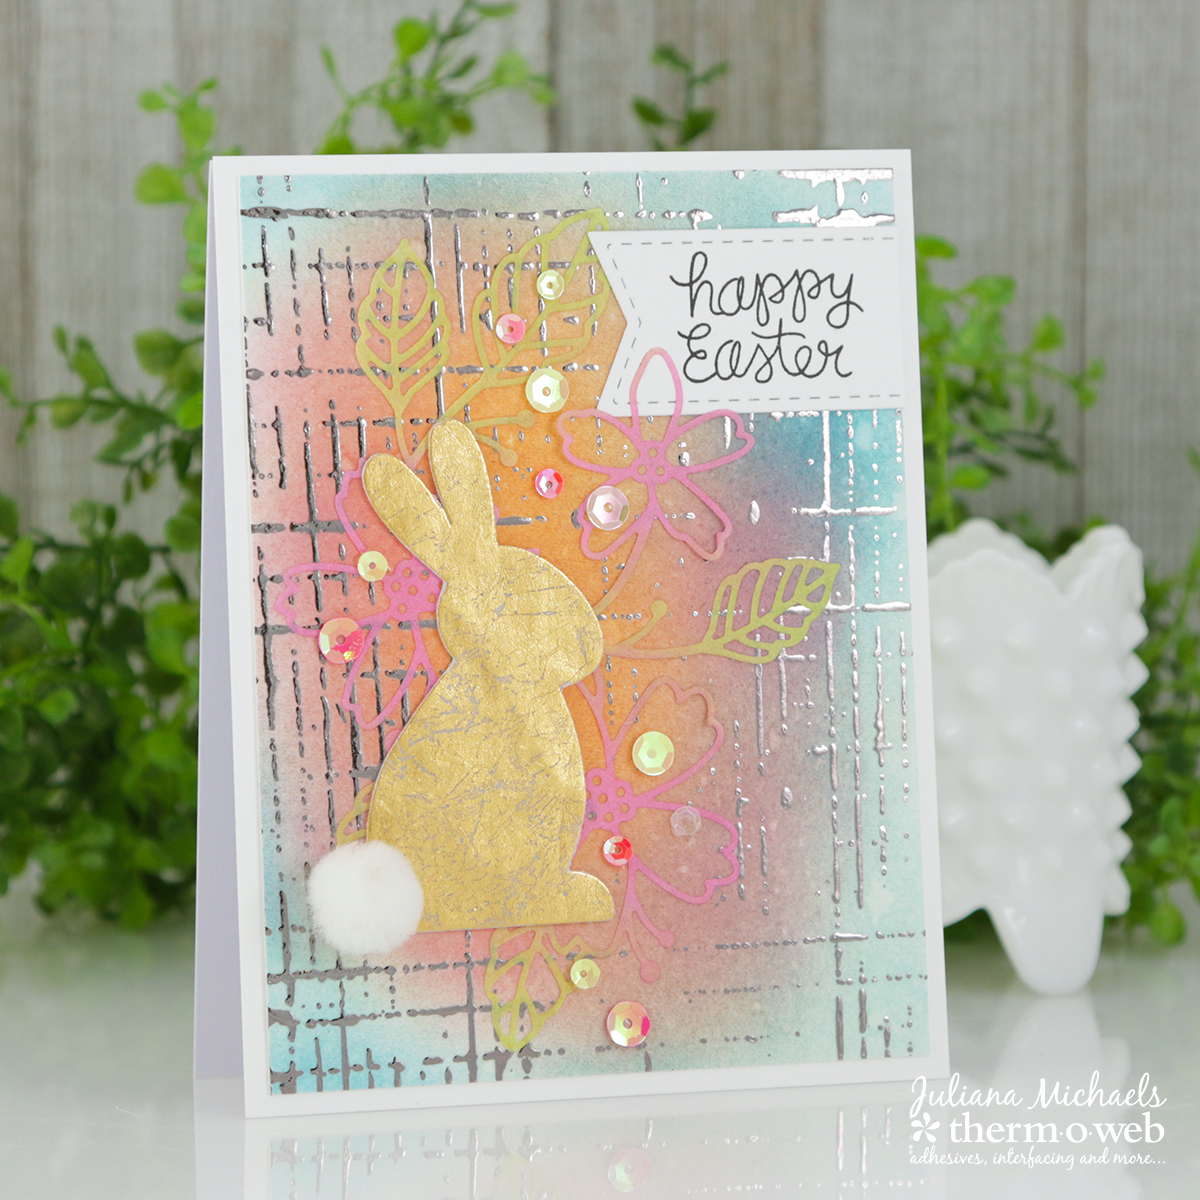 Mixed Media Easter Card by Juliana Michaels featuring Therm O Web Rebekah Meier Mixed Media Transfer Foil, Foam Sheets and Art Paper